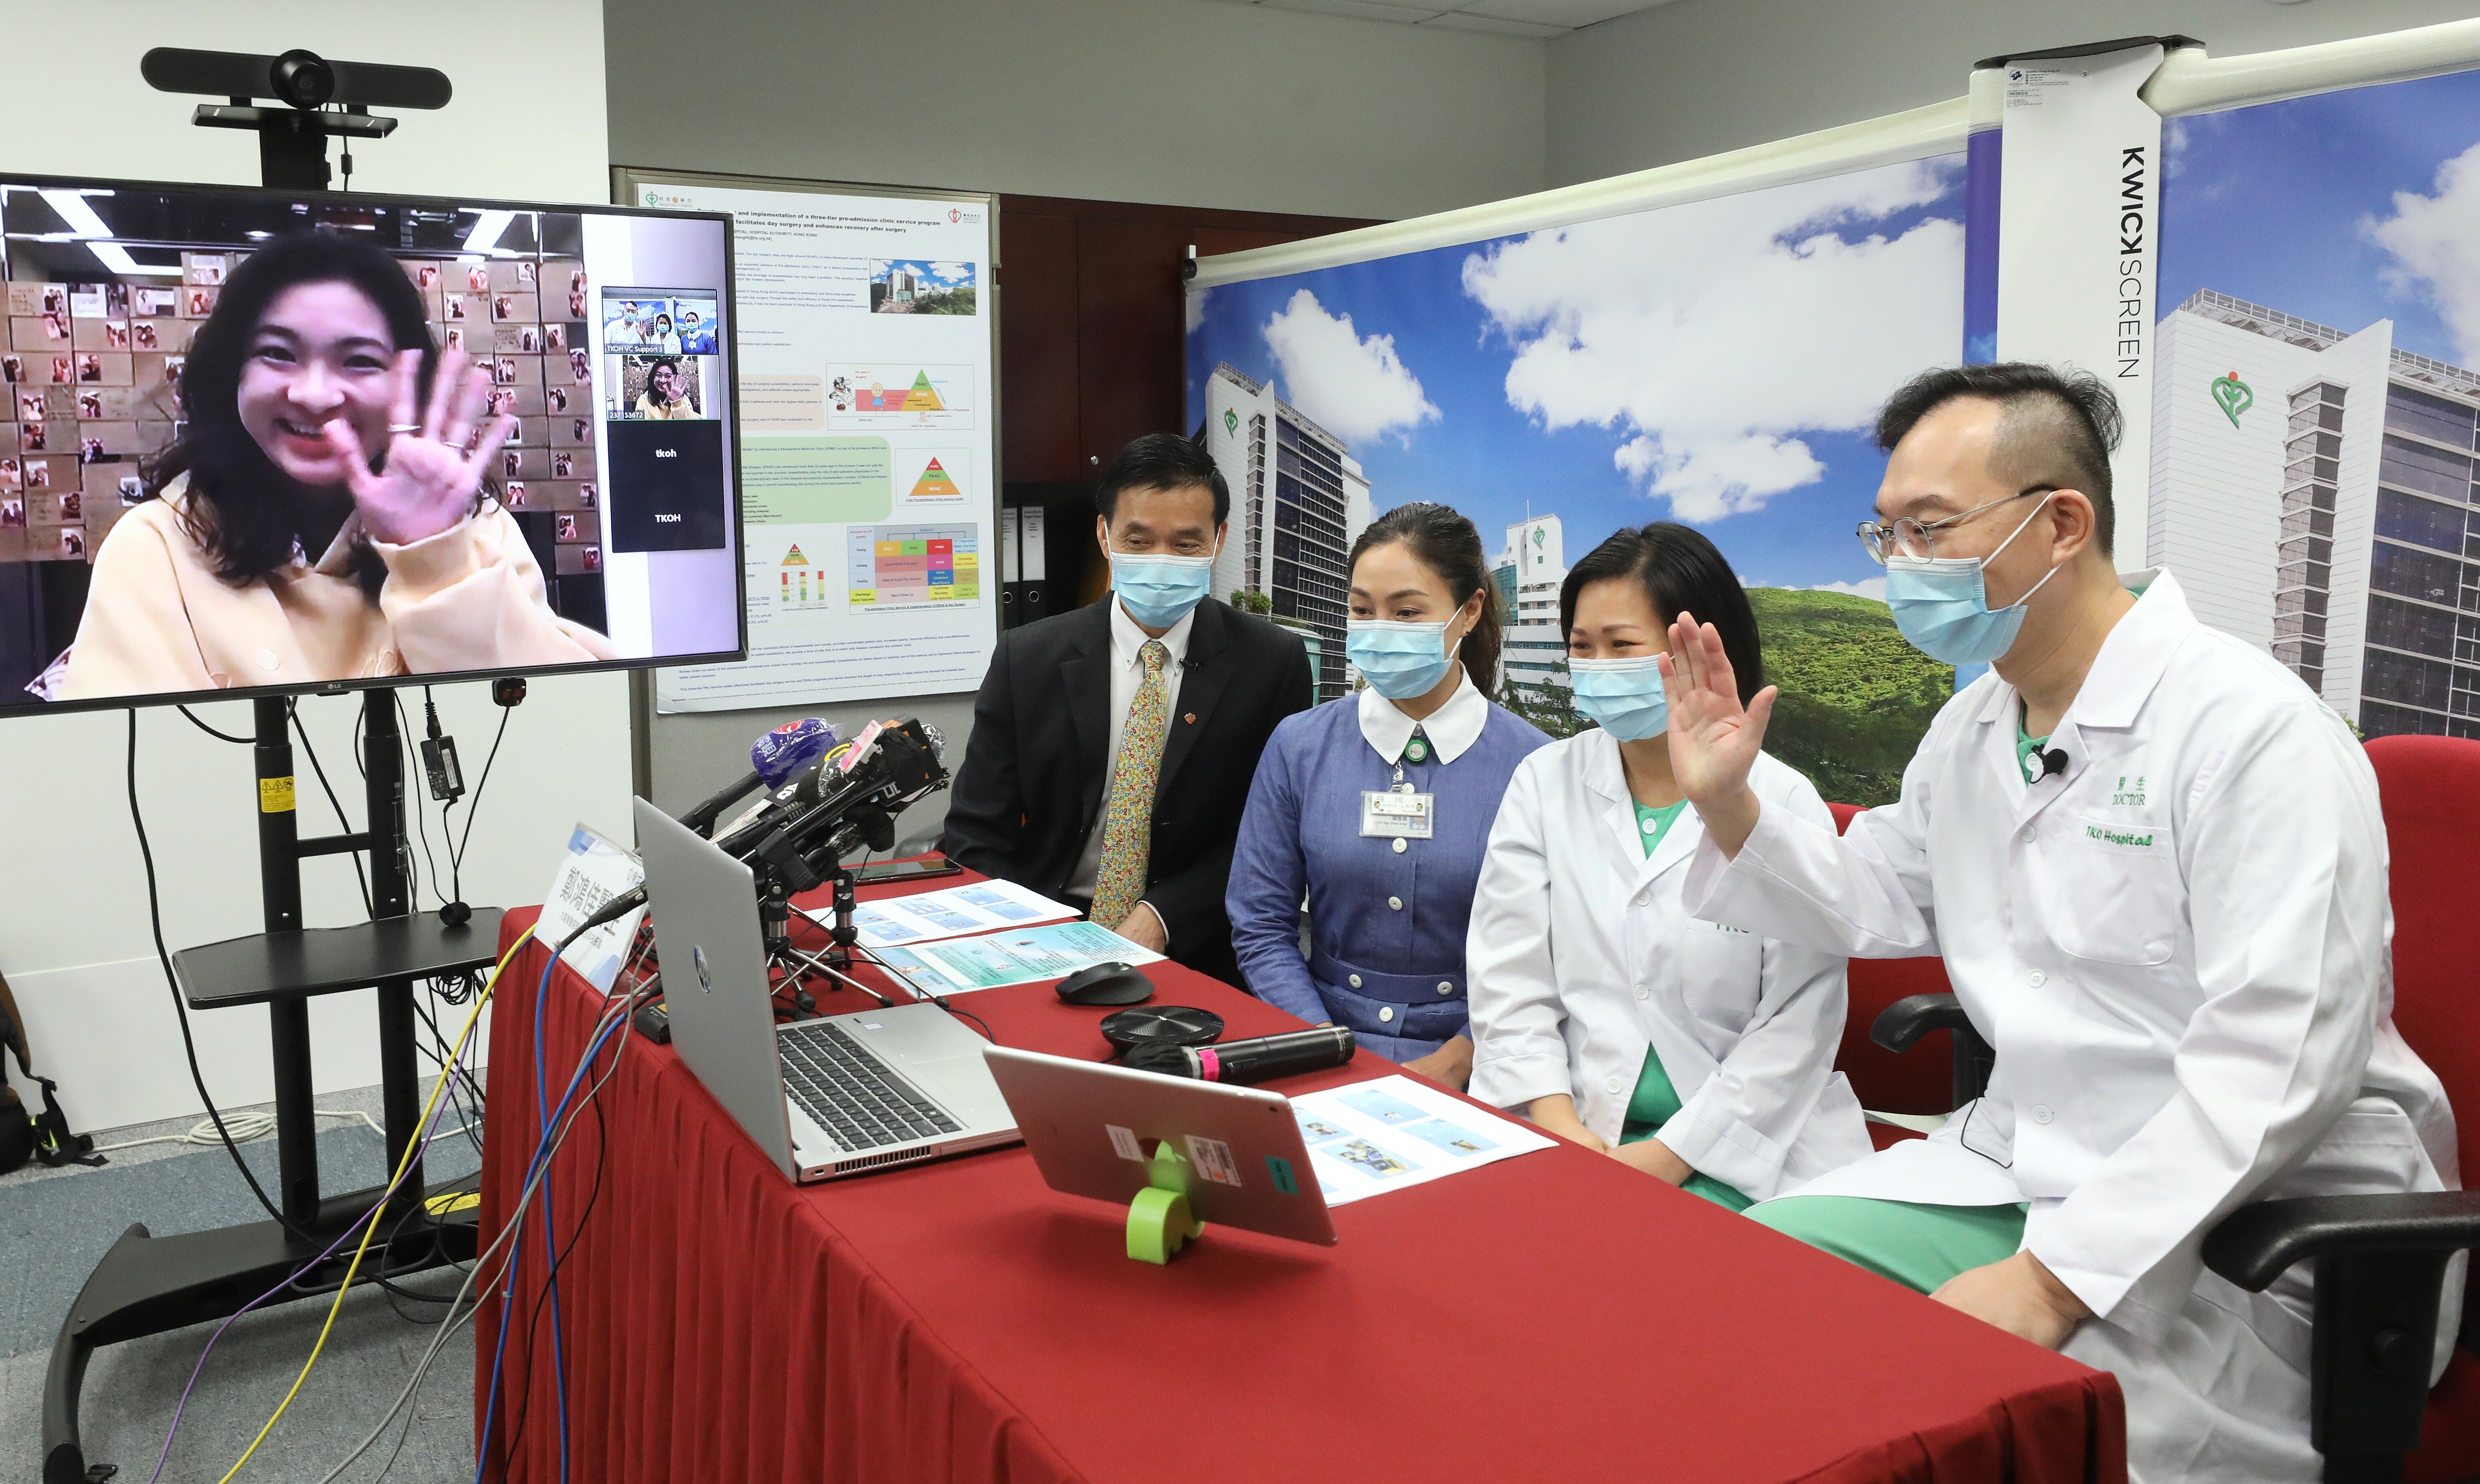 A patient joins a press conference on telemedicine in Tseung Kwan O Hospital on April 3 via video. The hospital is one of three in a pilot scheme to develop and deploy a comprehensive suite of smart hospital products. Photo: Dickson Lee